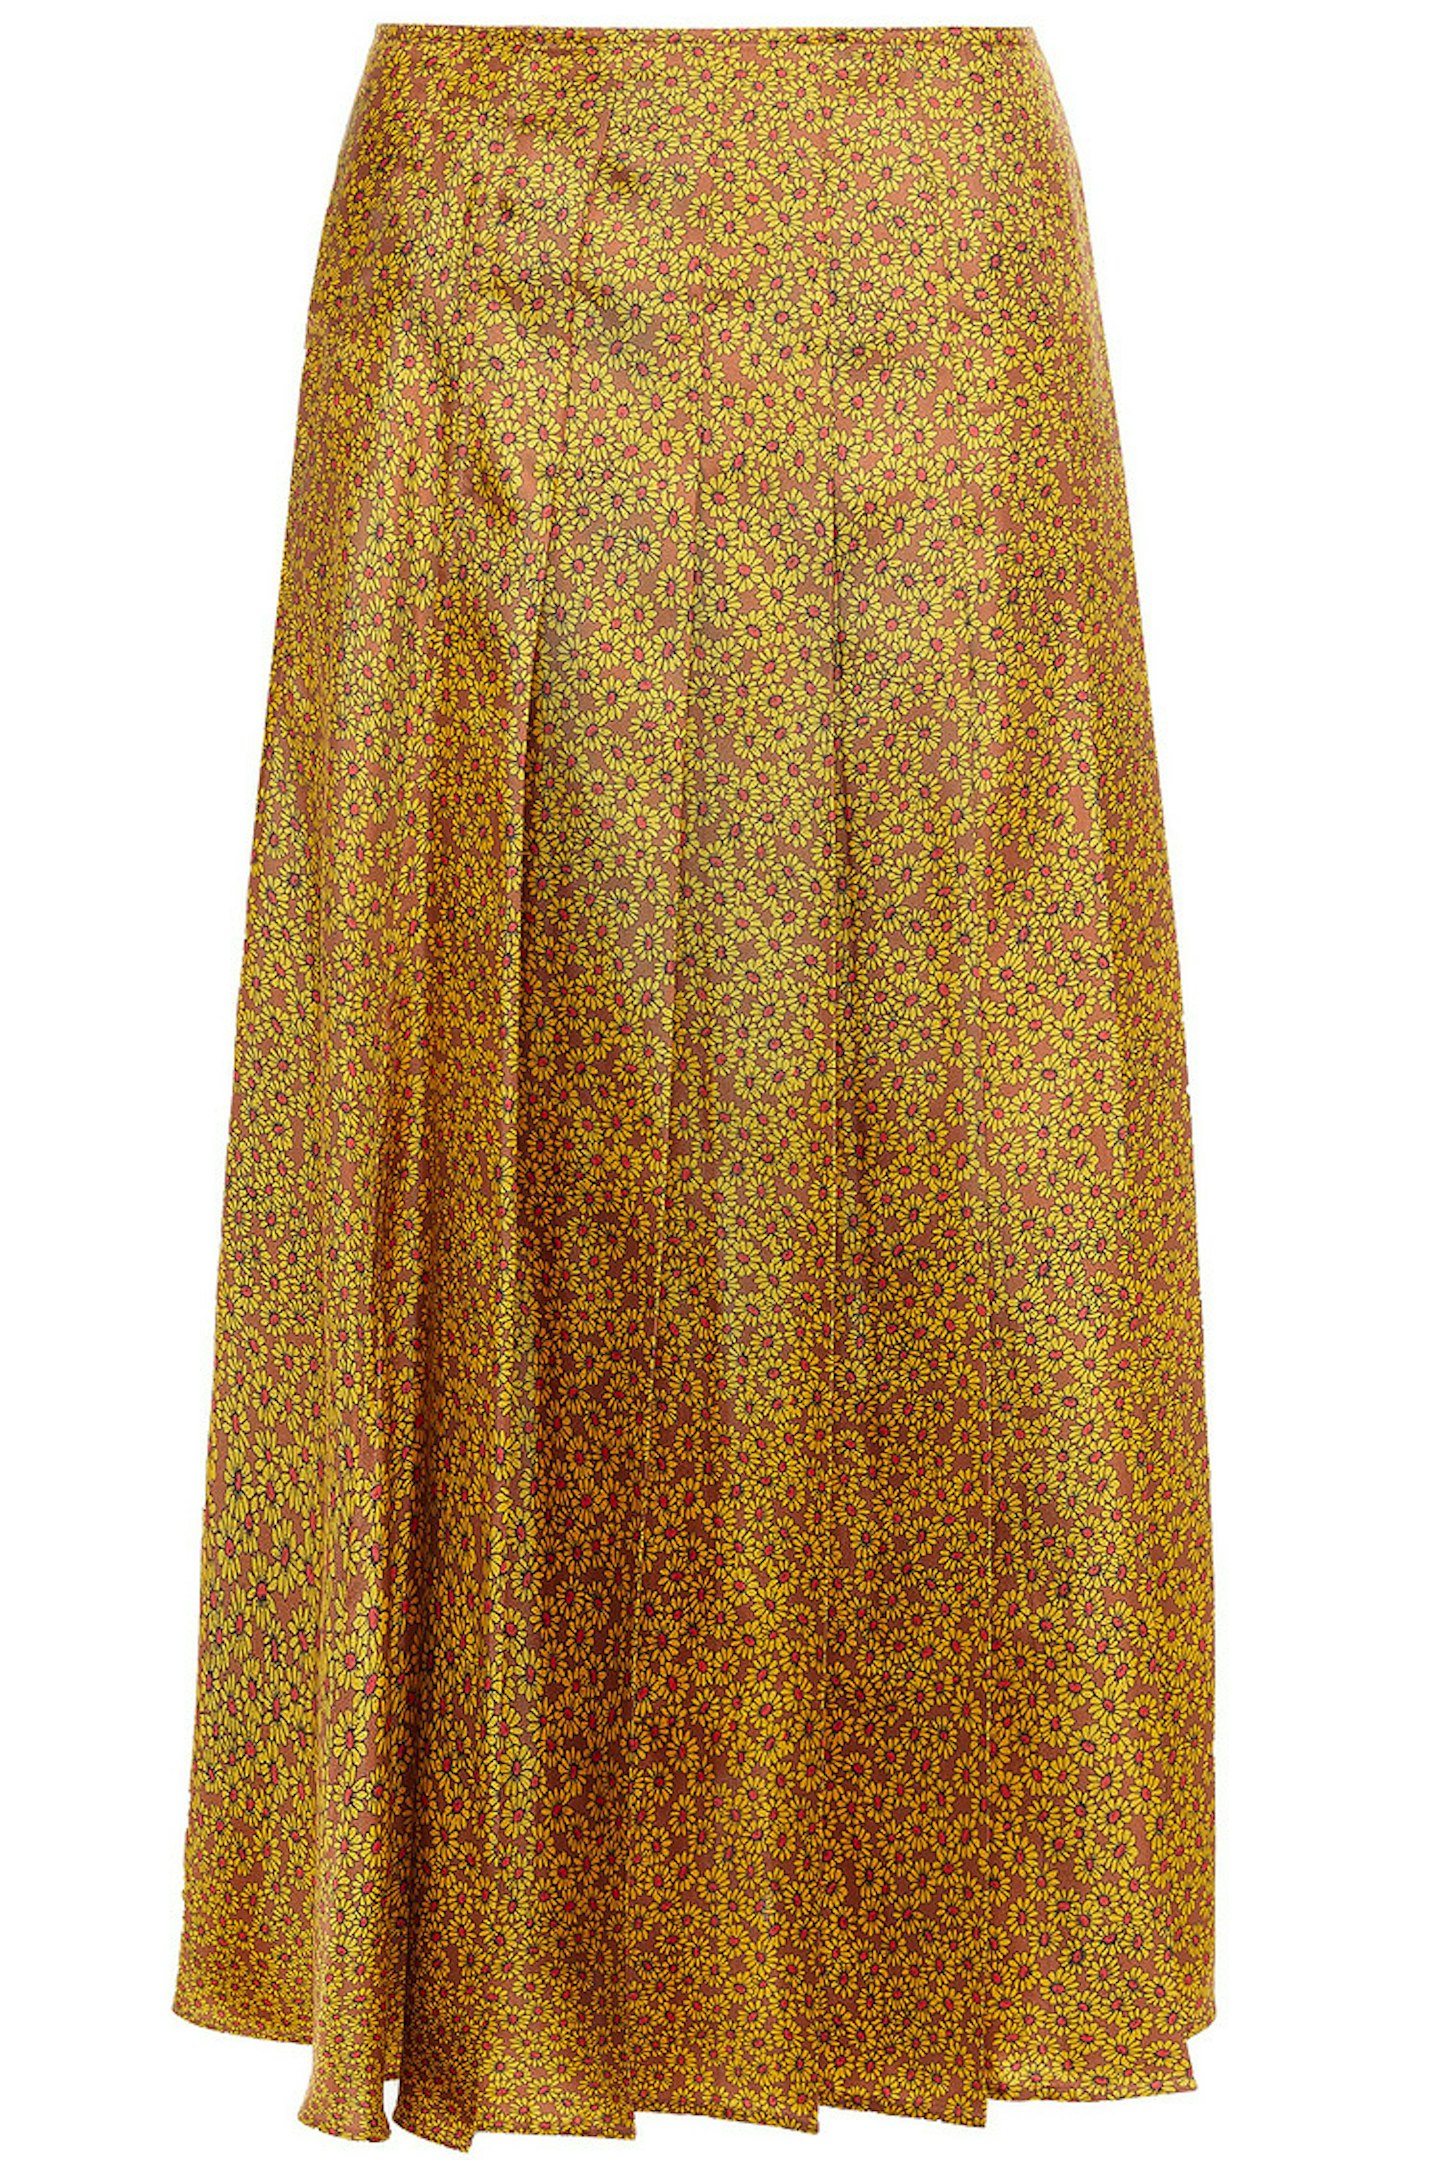 Victoria Beckham at The Outnet, Pleated floral-print silk-twill midi skirt, £450